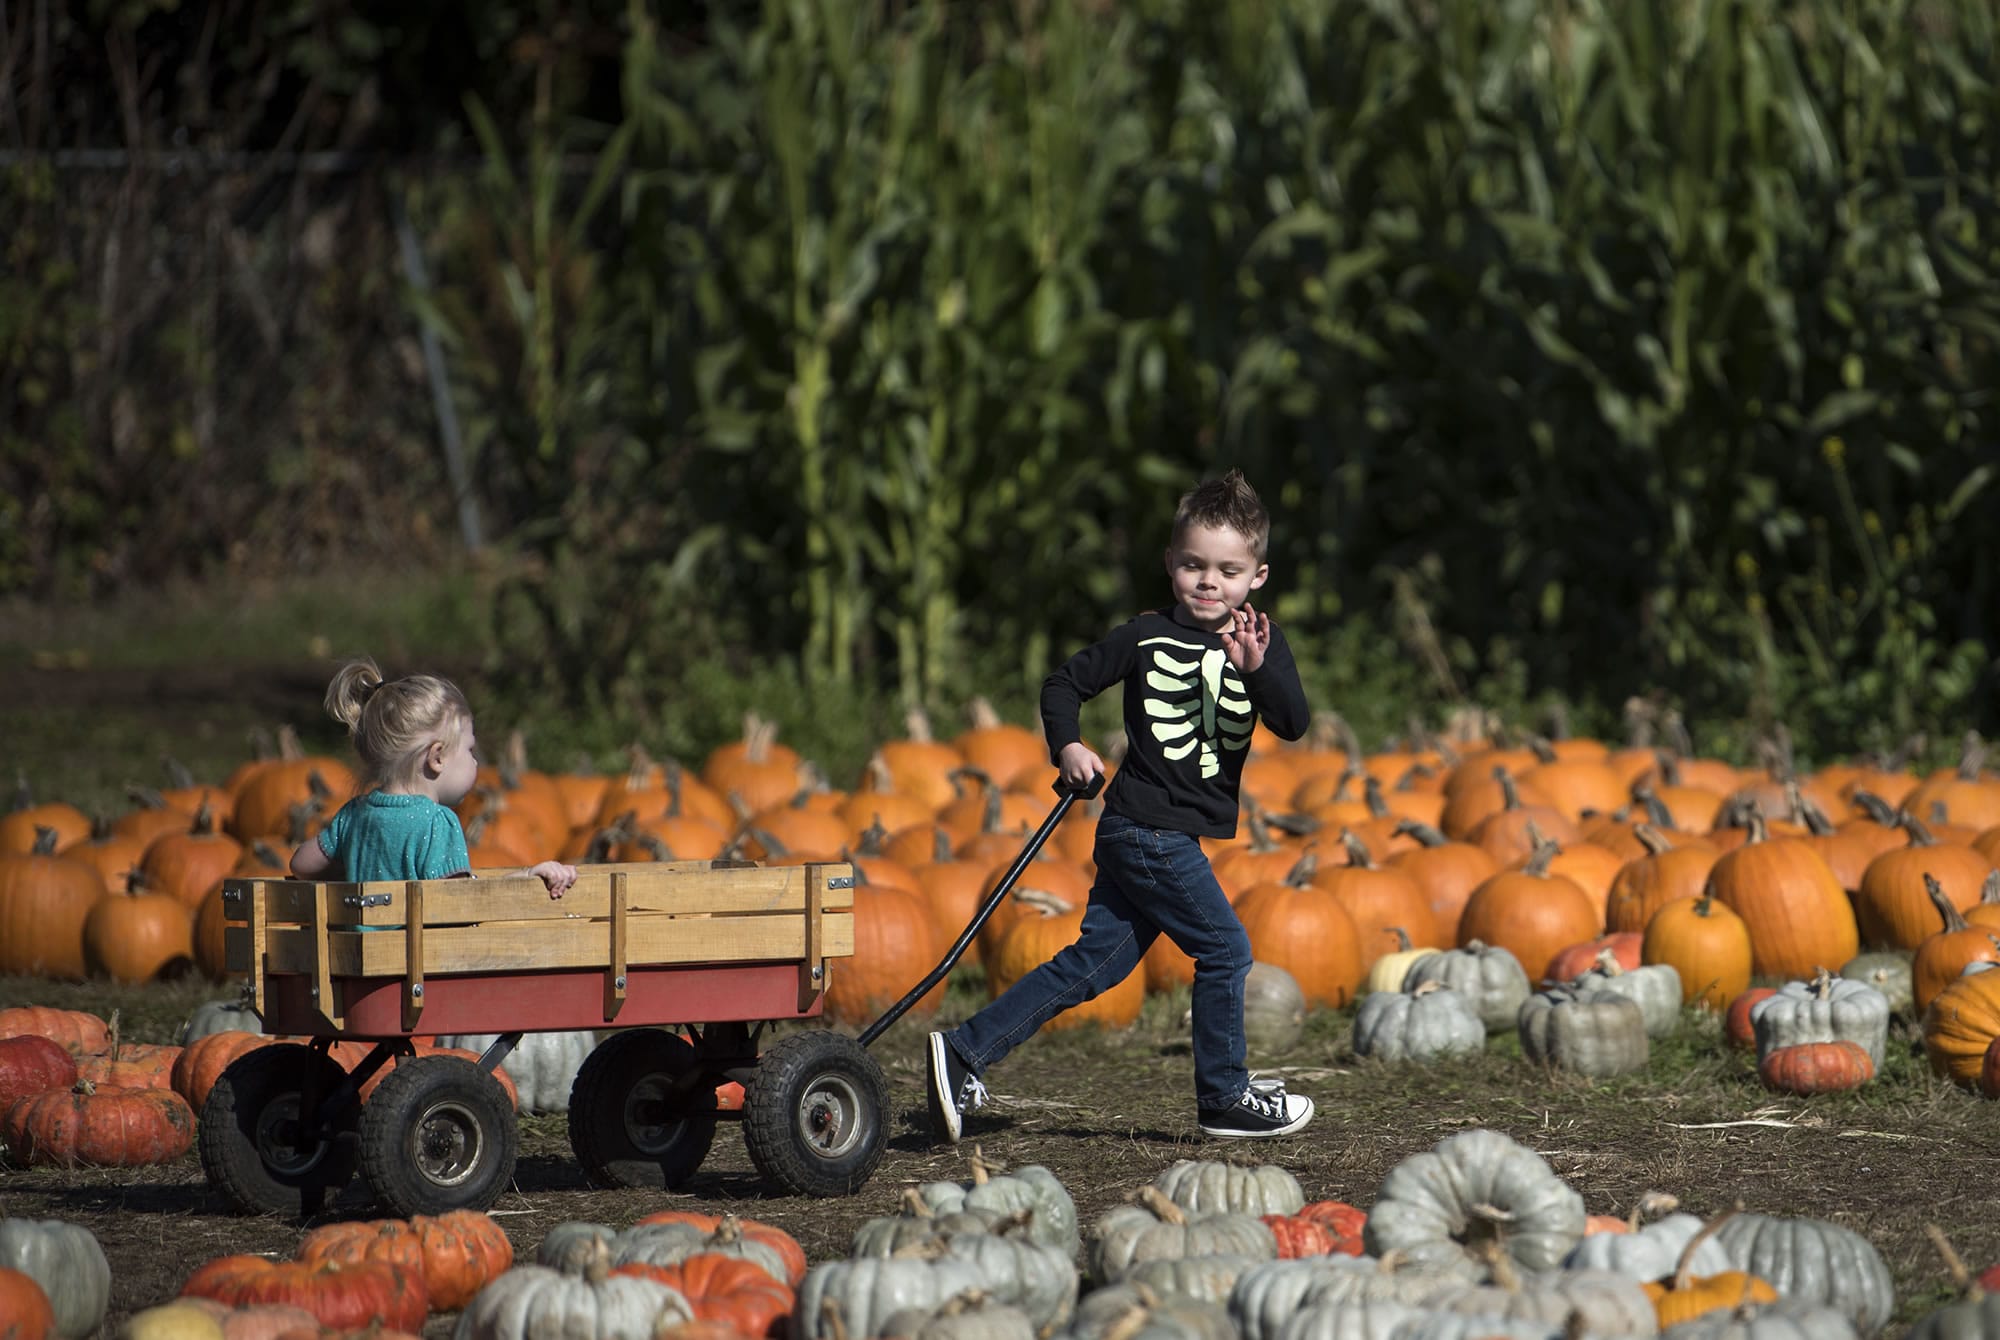 Monday was a picture-perfect day to pick a pumpkin at Clark County’s retail farms. Carson Katain, 4, and his sister, Everley, 2, enjoyed their outing to Joe’s Place Farms in east Vancouver.